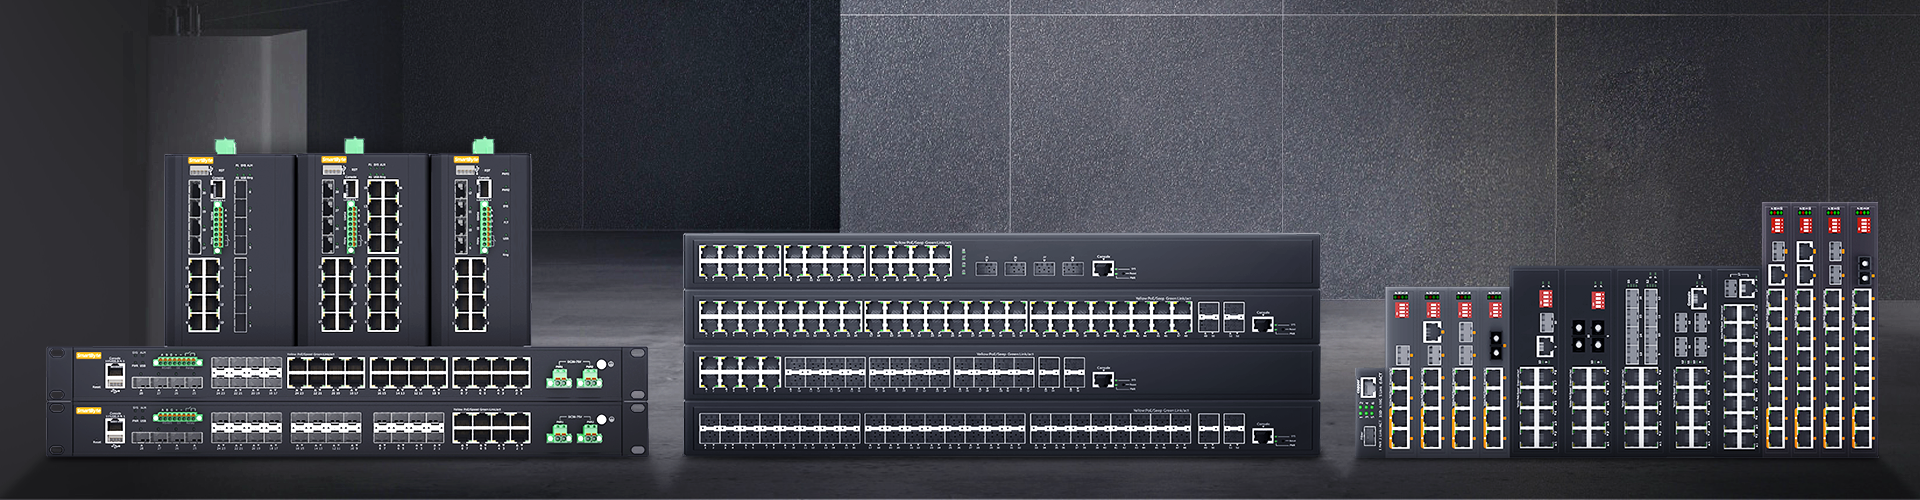 Layer 2+ Managed Ethernet Switches